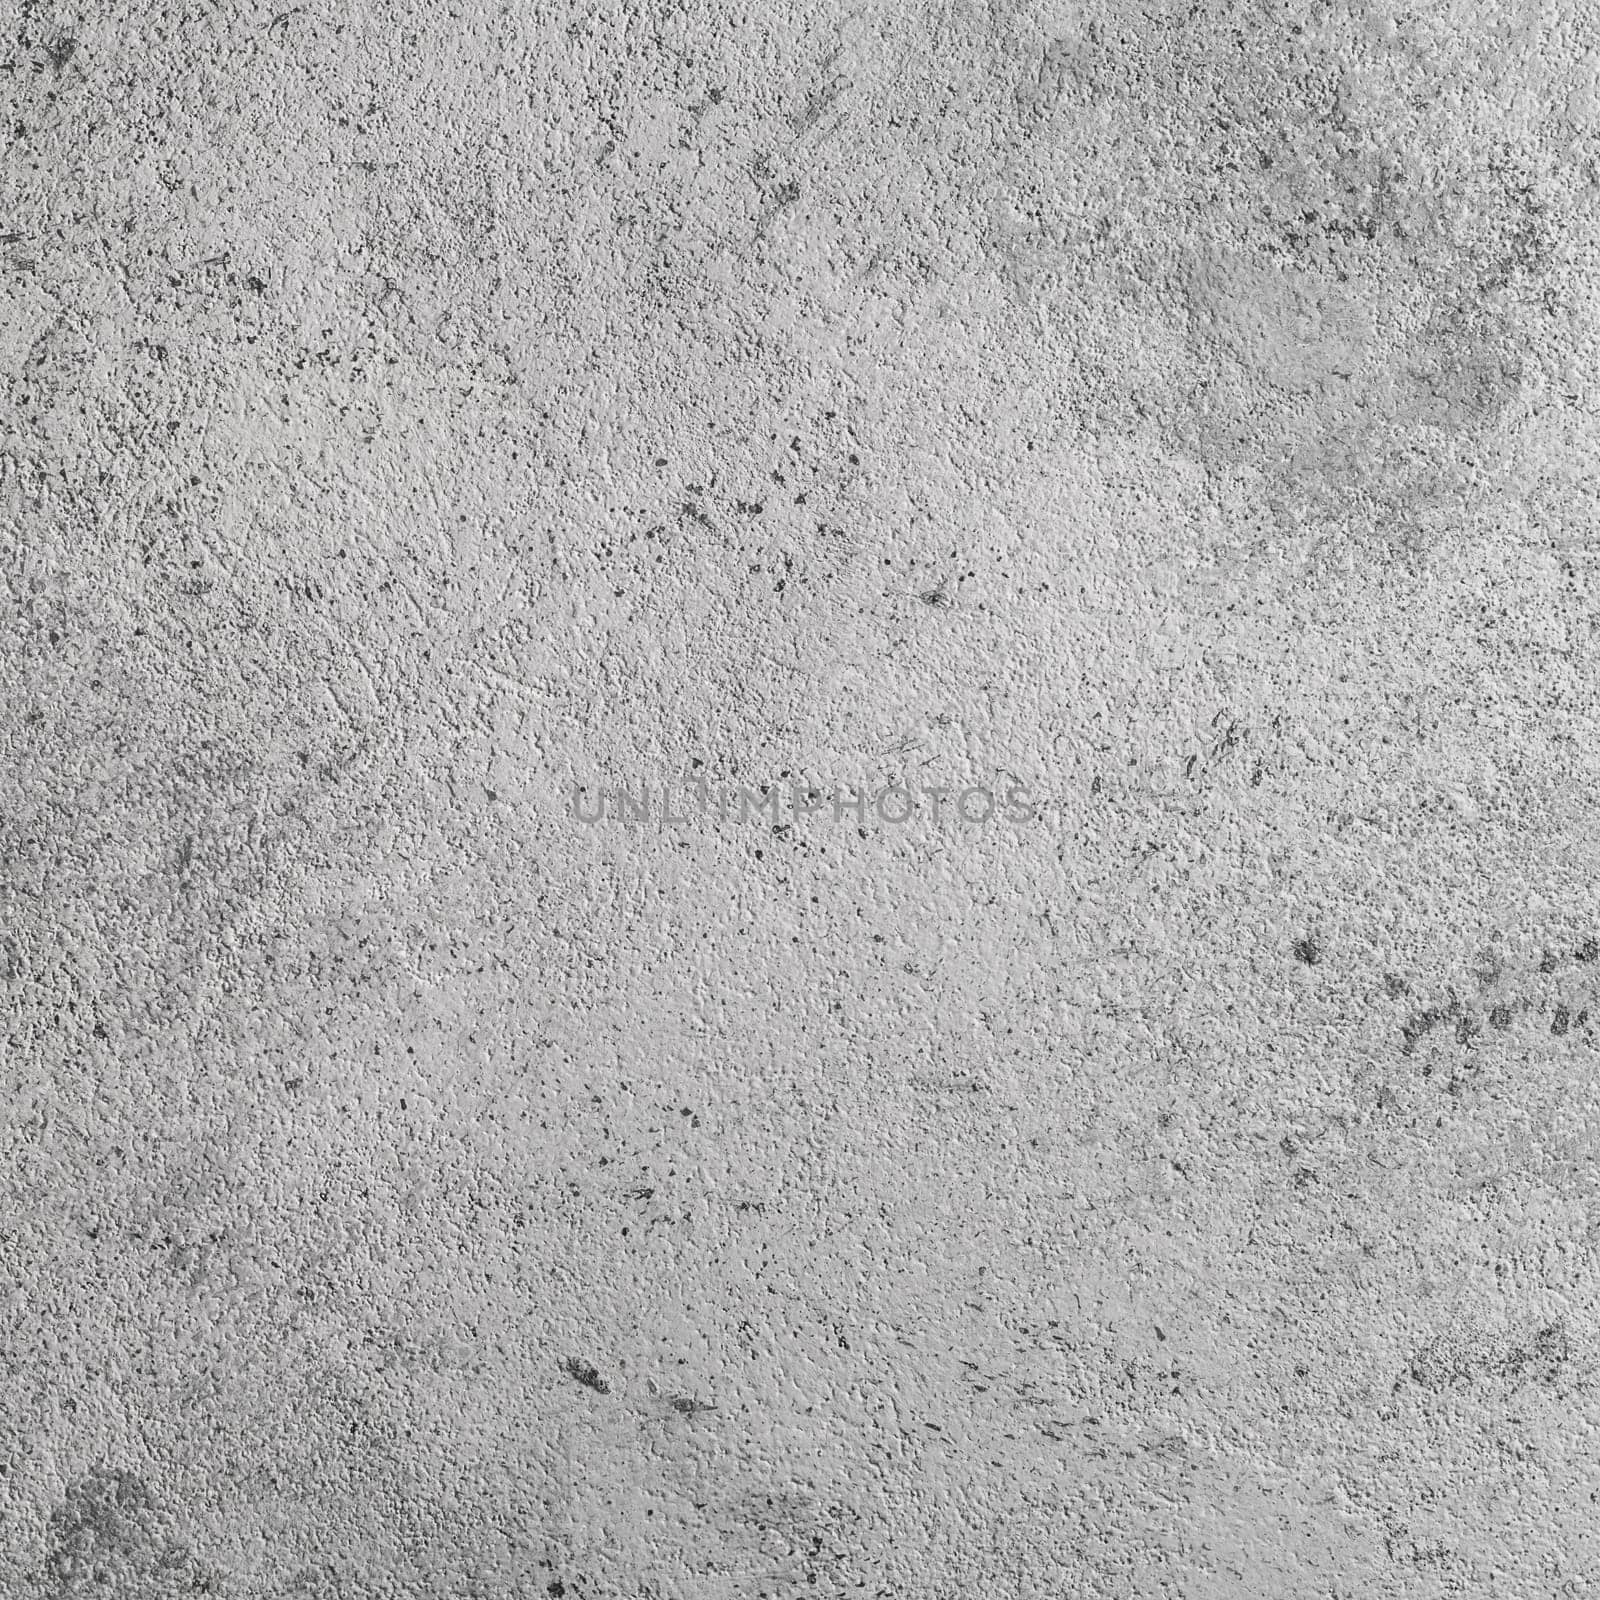 Light gray cement texture. Grey concrete wall as background. Square. Can use as banner for design